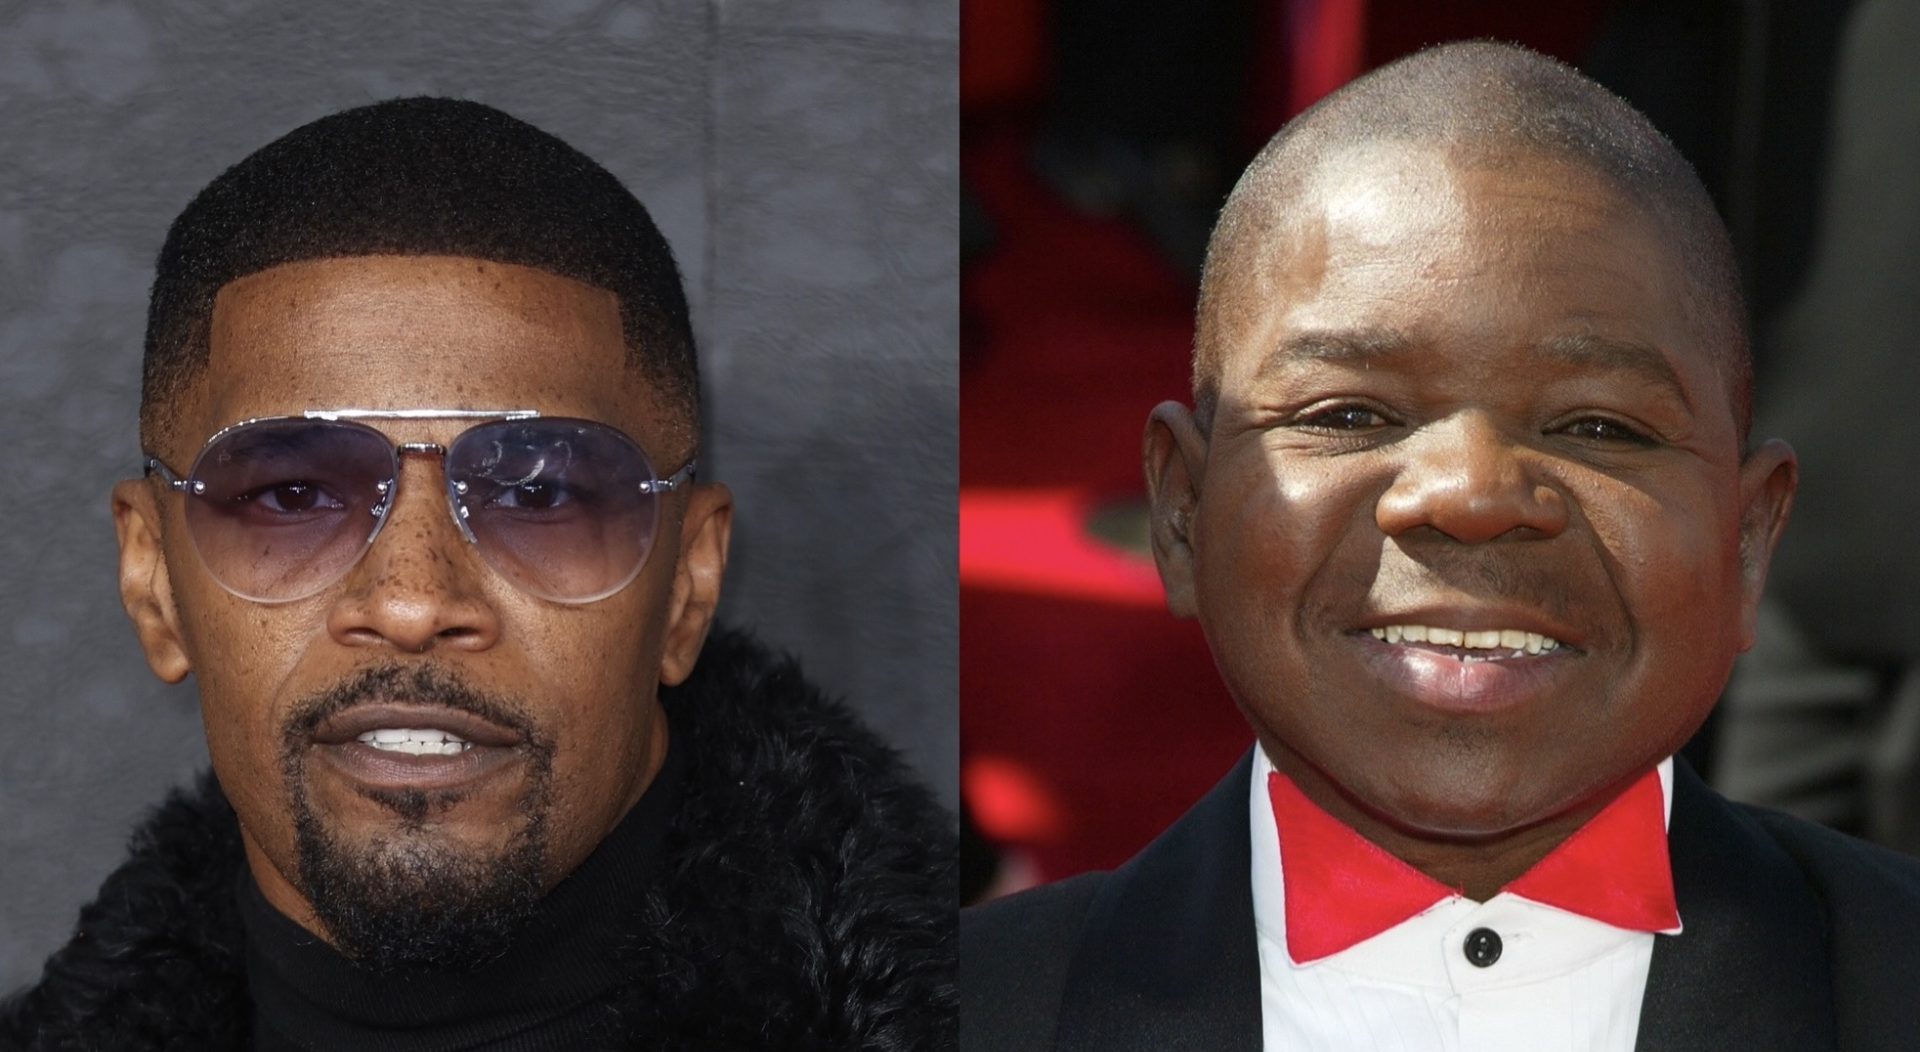 From Jamie Foxx To The Late Gary Coleman: Here Are 5 Celebs You Didn't Know Were Adopted